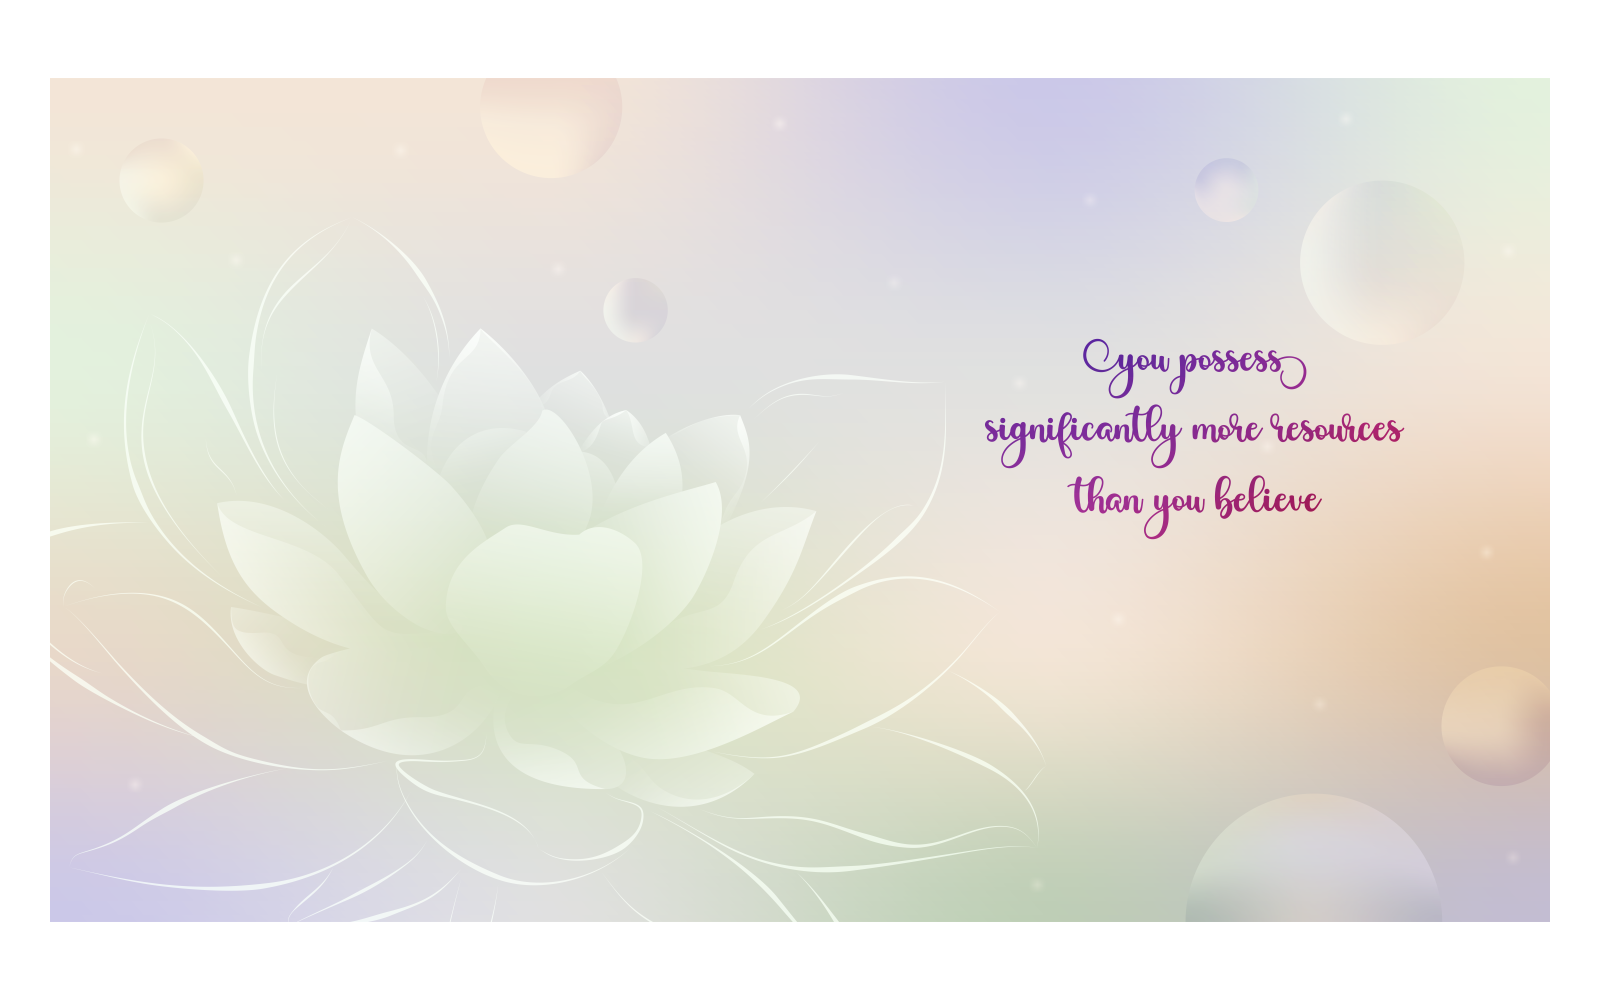 Inspirational Backgrounds 14400x8100px With Lotus And Message About Resources